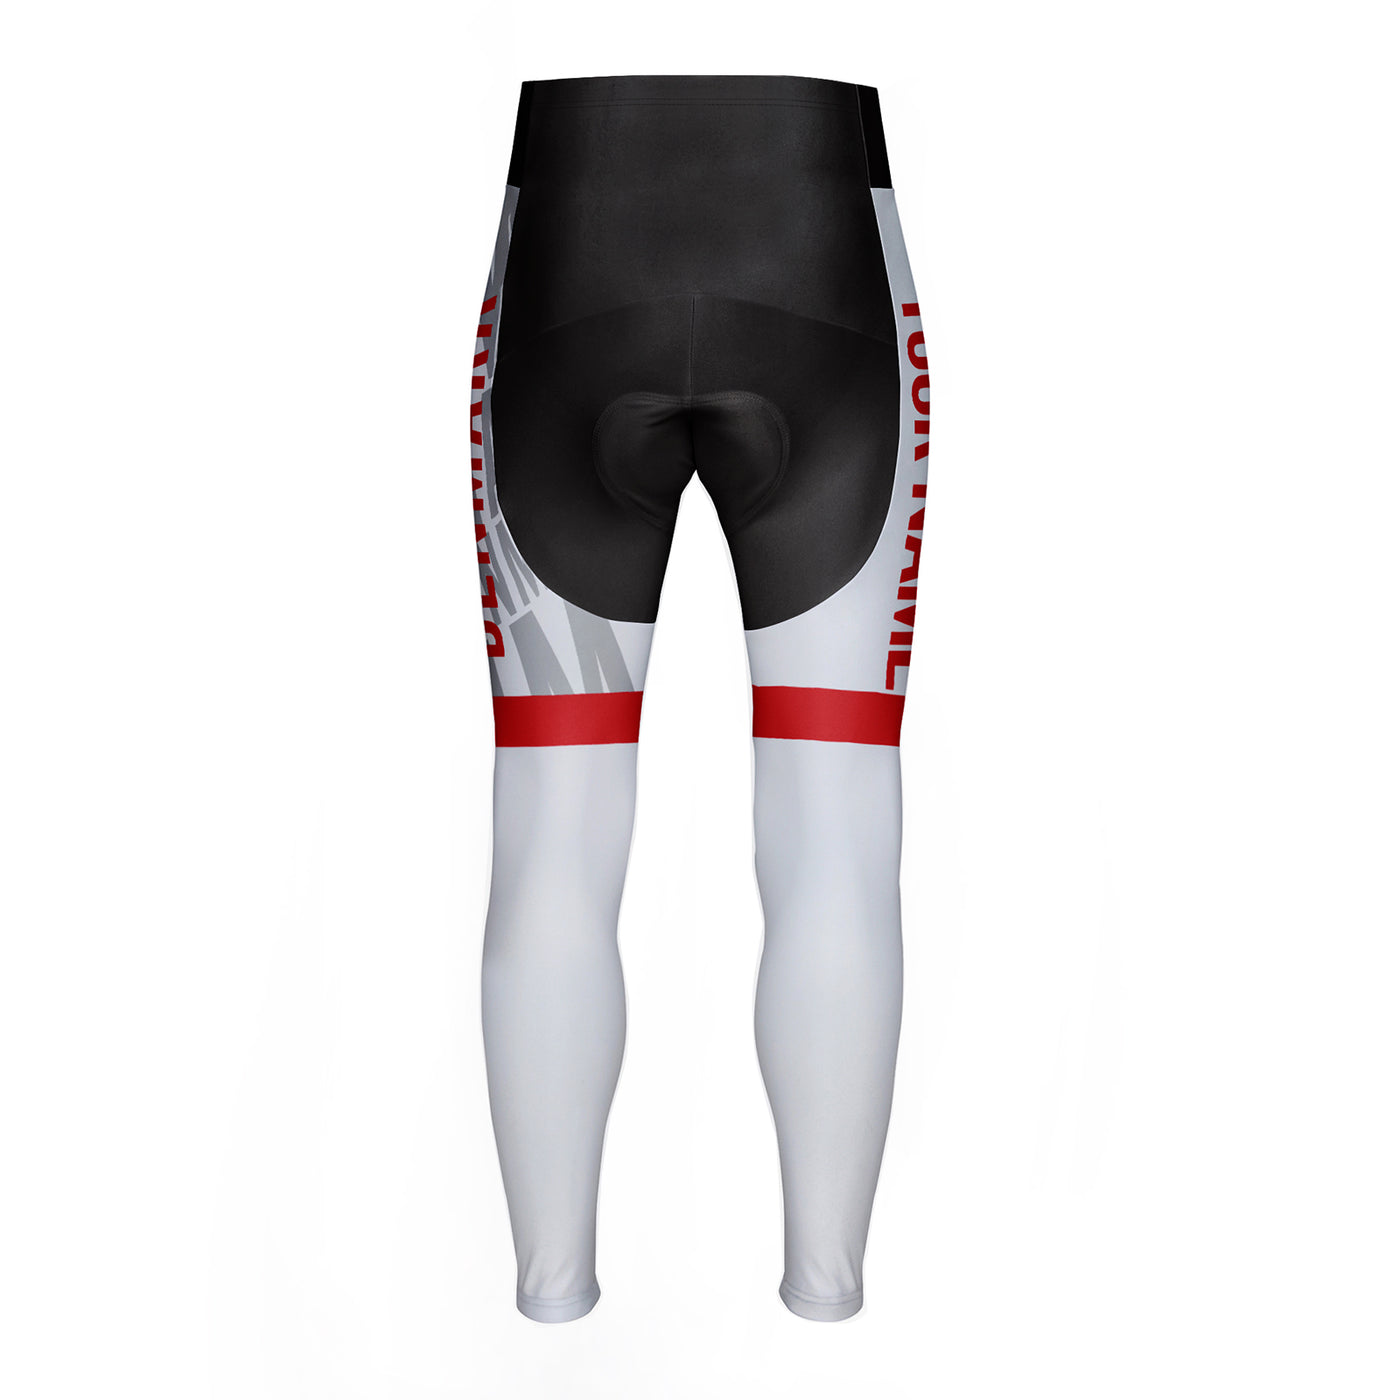 Customized Denmark Unisex Cycling Tights Long Pants